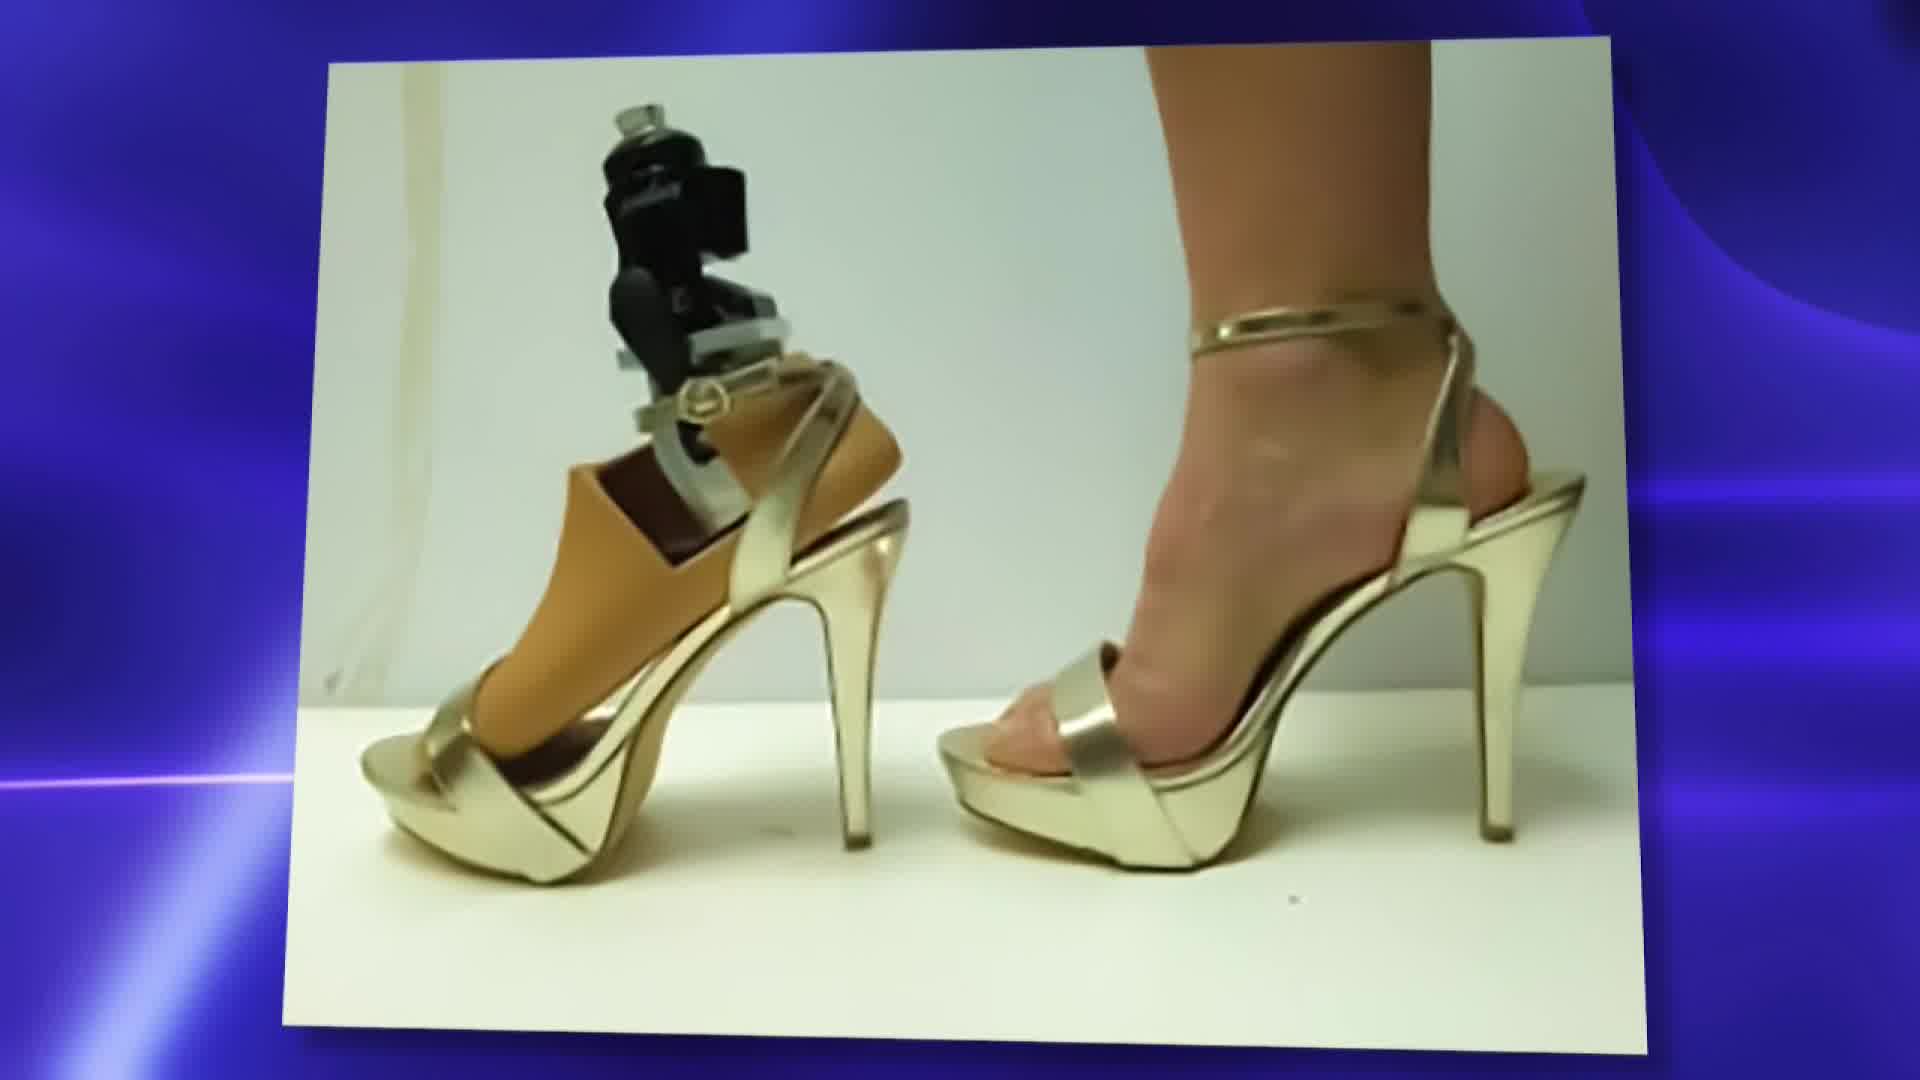 Johns Hopkins students design prosthetic foot fit for high heels